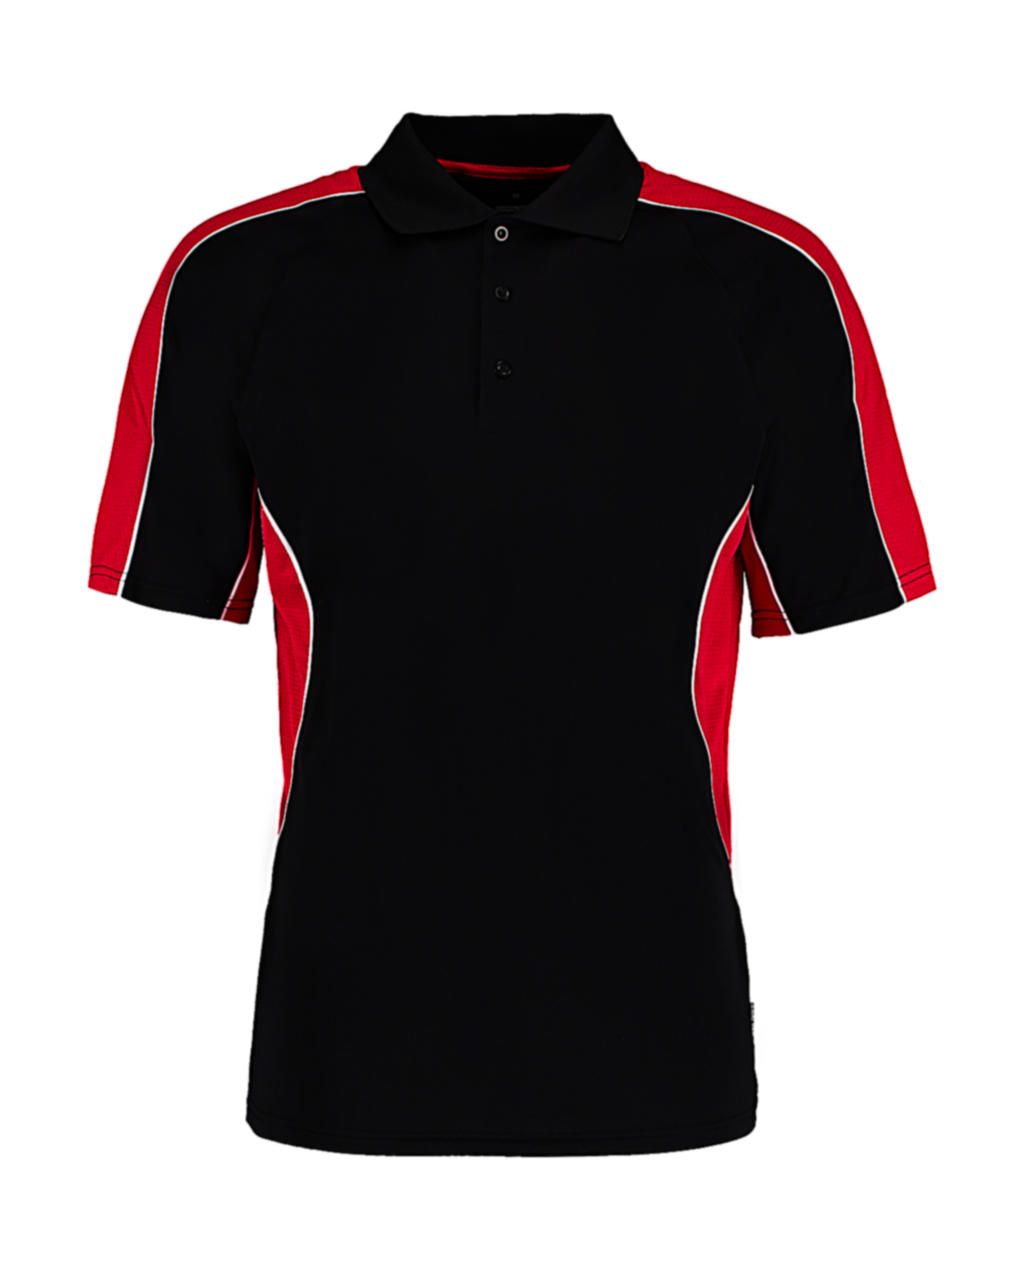  Classic Fit Cooltex? Contrast Polo Shirt in Farbe Black/Red